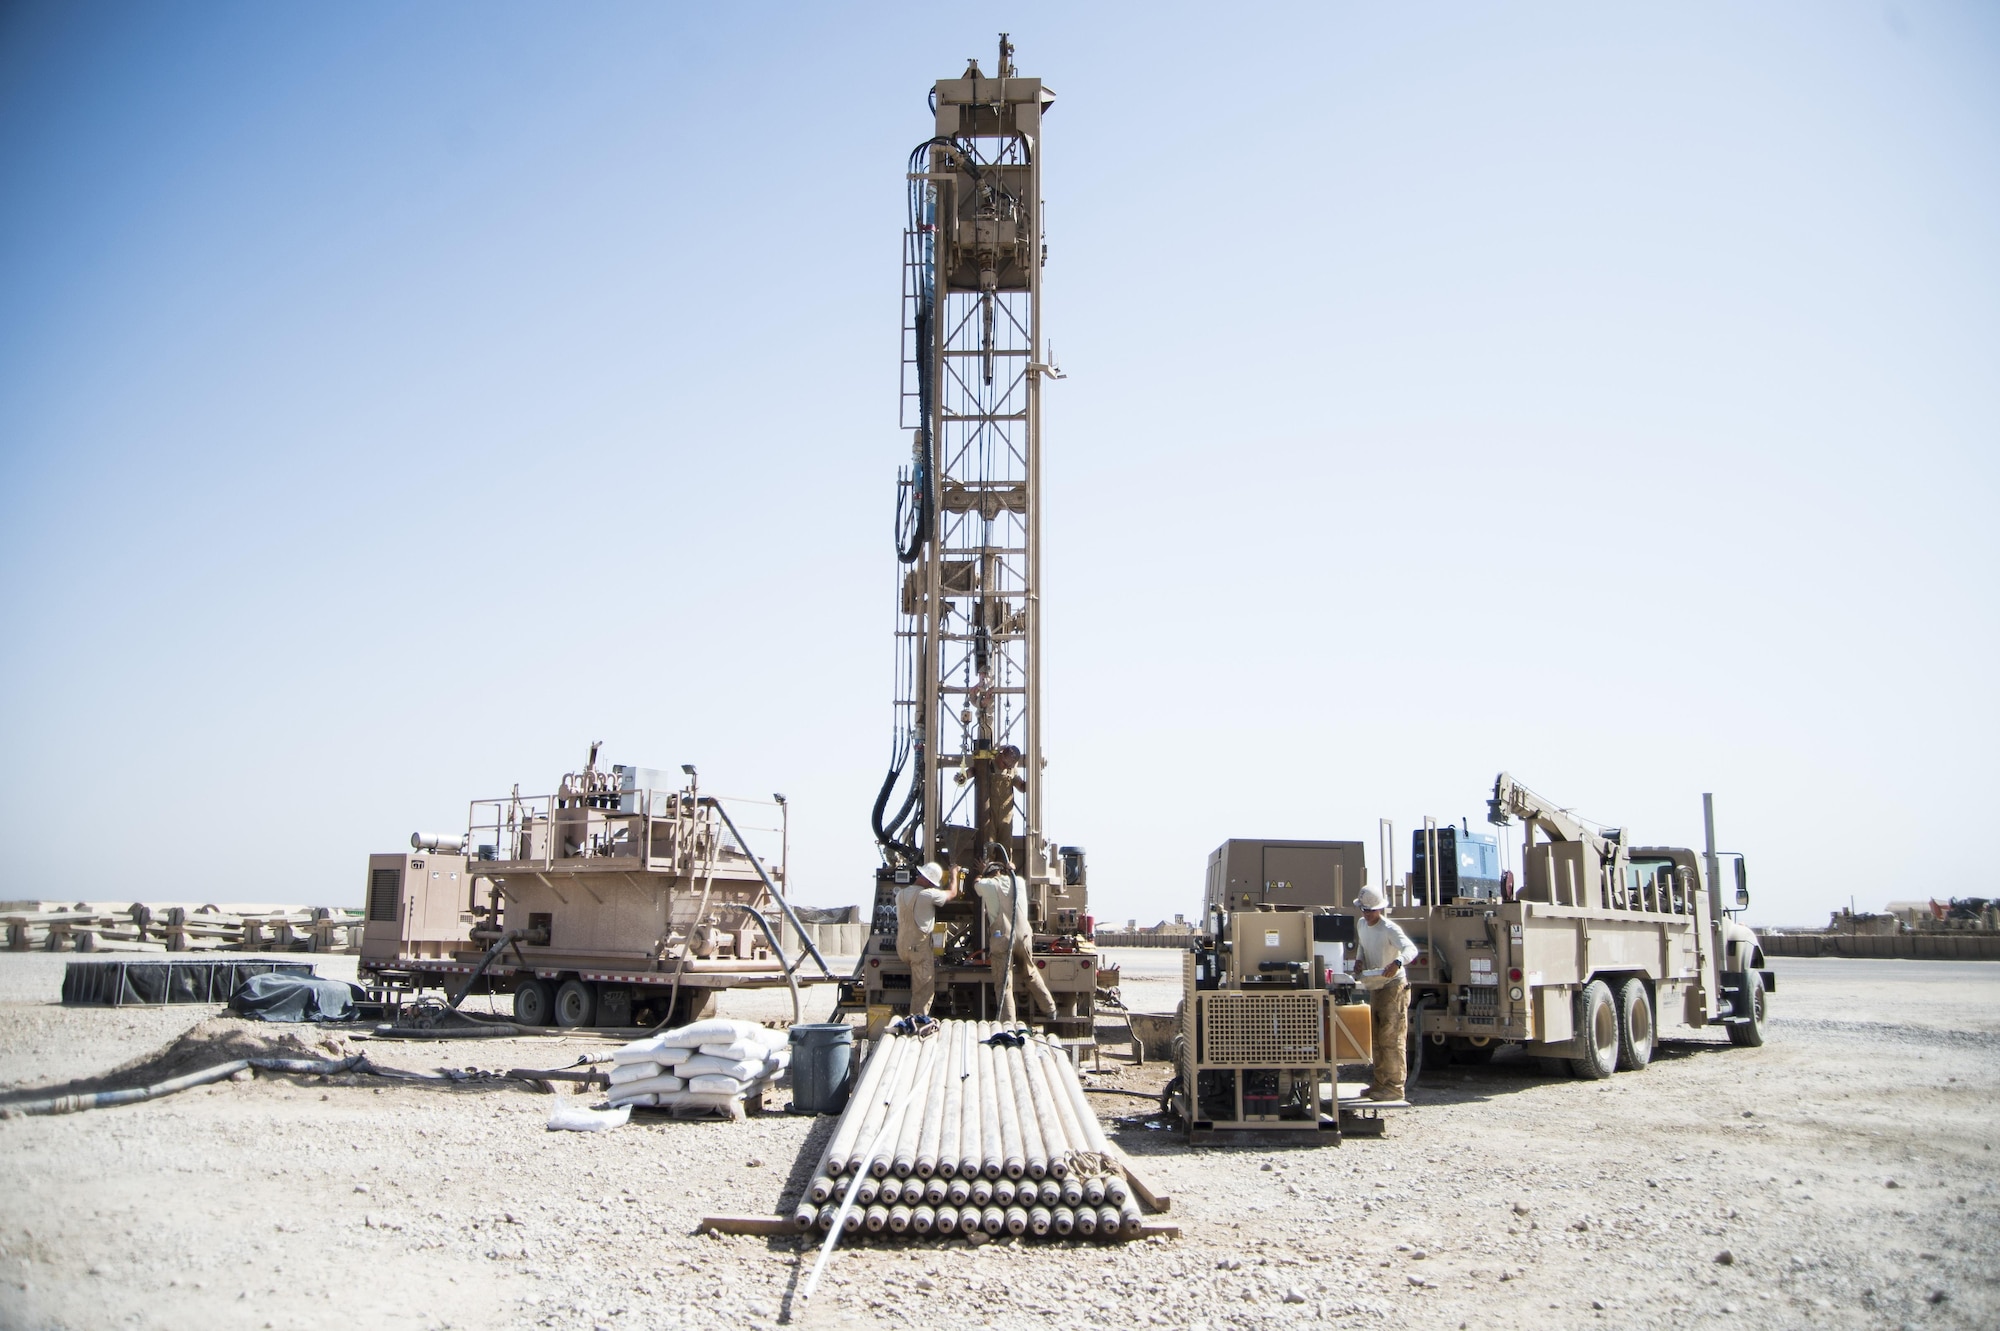 Airmen assigned to the 557th Expeditionary Red Horse Squadron, work at the well drilling site on Al Taqaddum Air Base, Iraq, June 2, 2016. The 557th ERHS well drilling team are obtaining an organic water source for Al Taqaddum. Red Horse is helping to improve Iraq's infrastructure in support of the Government of Iraq.
(U.S. Air Force photo/Staff Sgt. Larry E. Reid Jr., Released)